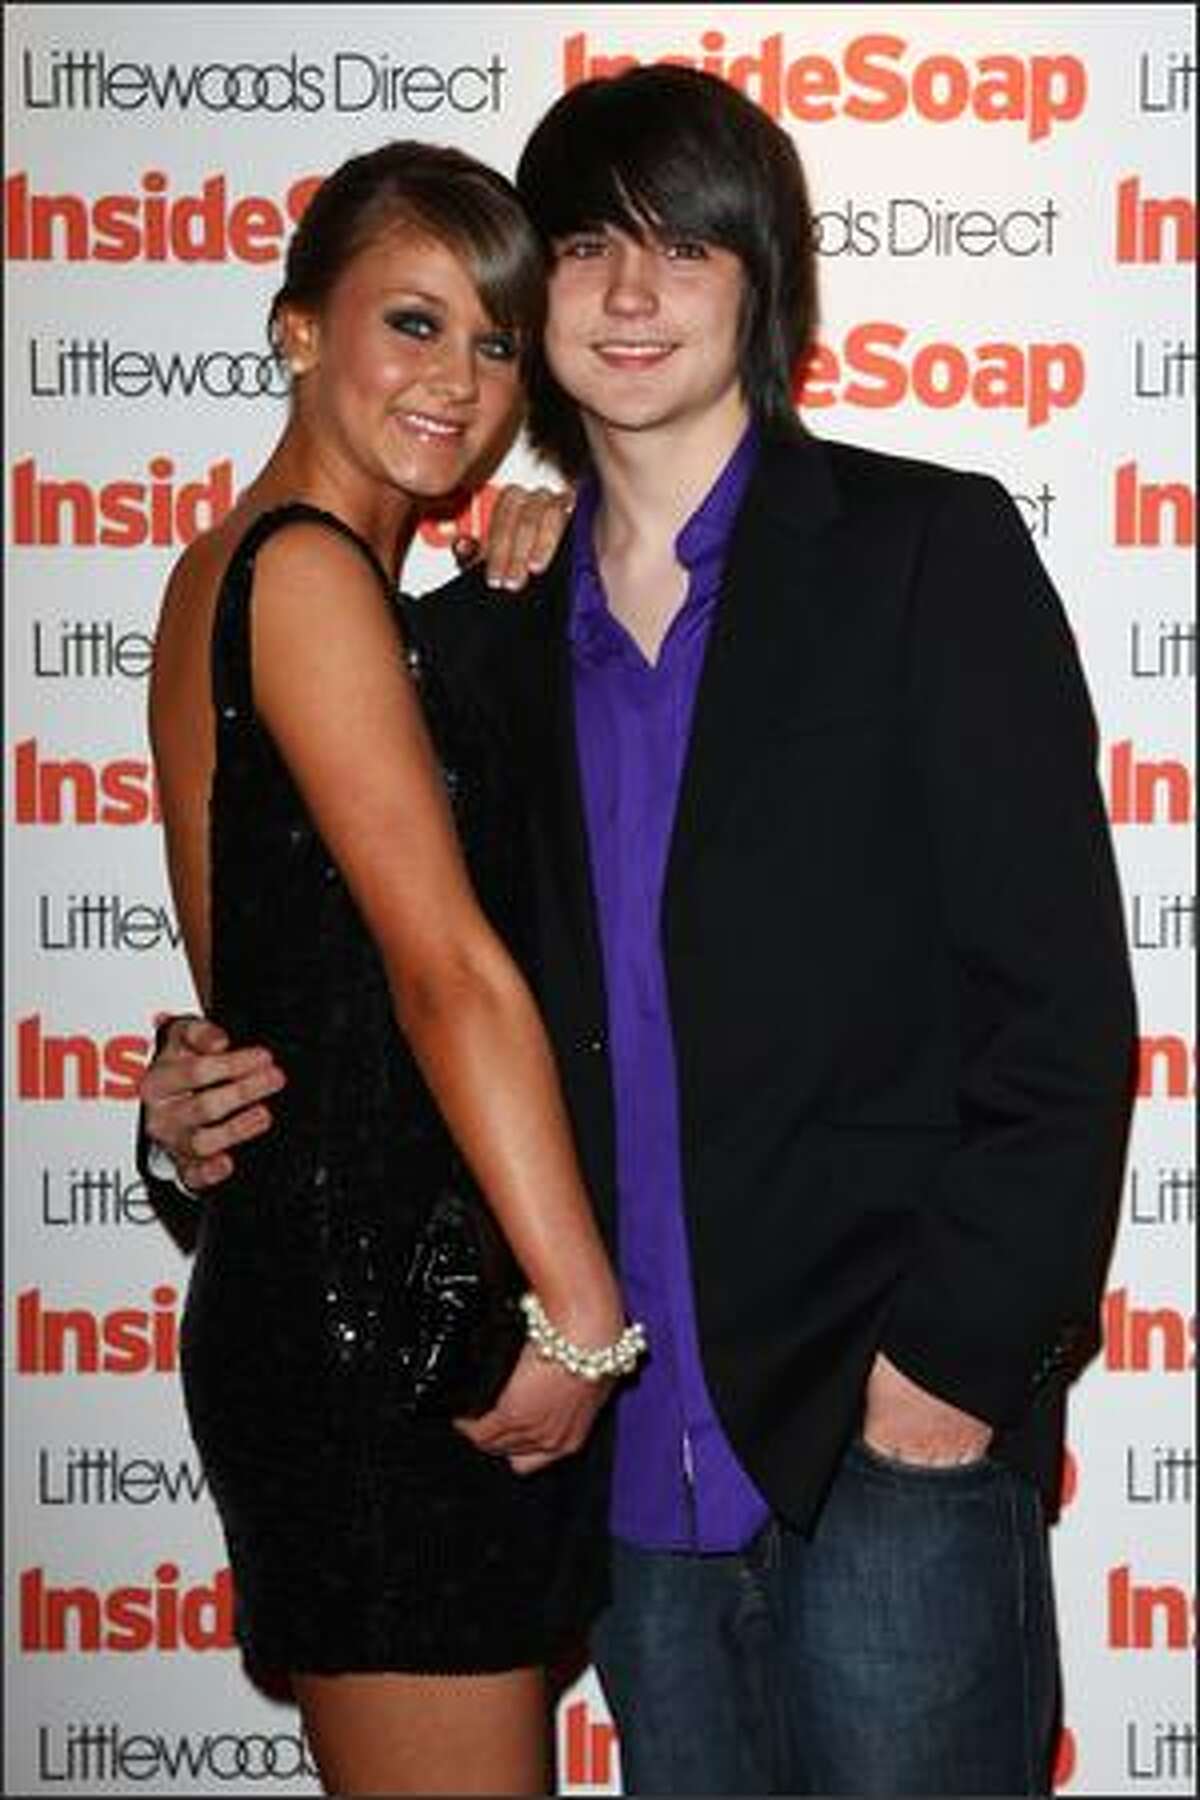 Actors Brooke Vincent and Ben Thompson pose in the press room for the Inside Soap Awards 2008 at Gilgamesh, Camden Lock on Monday in London, England.